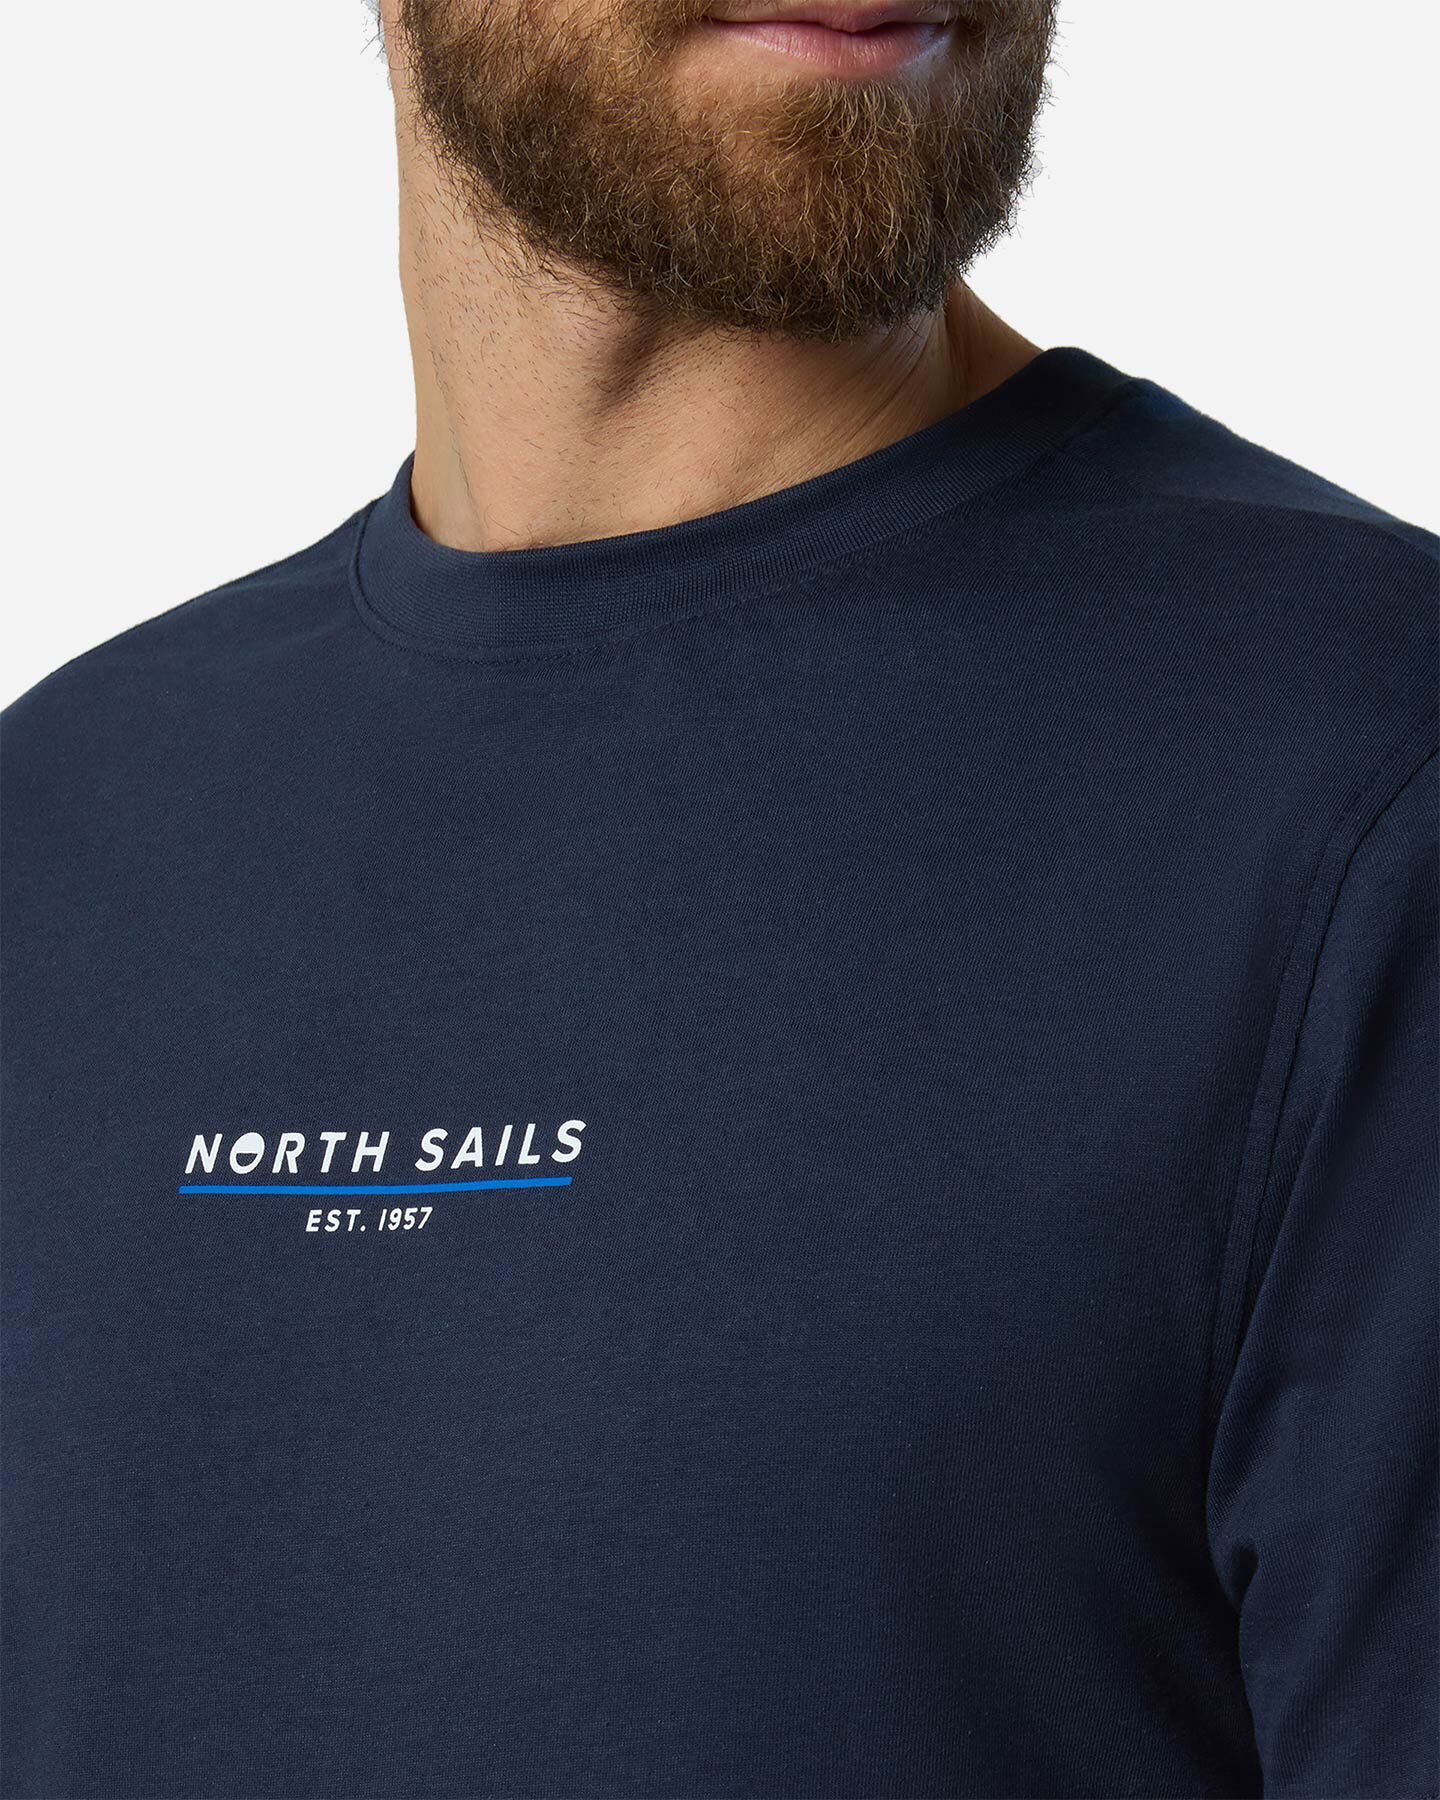  T-Shirt NORTH SAILS NEW LOGO M S5684009|0802|S scatto 4